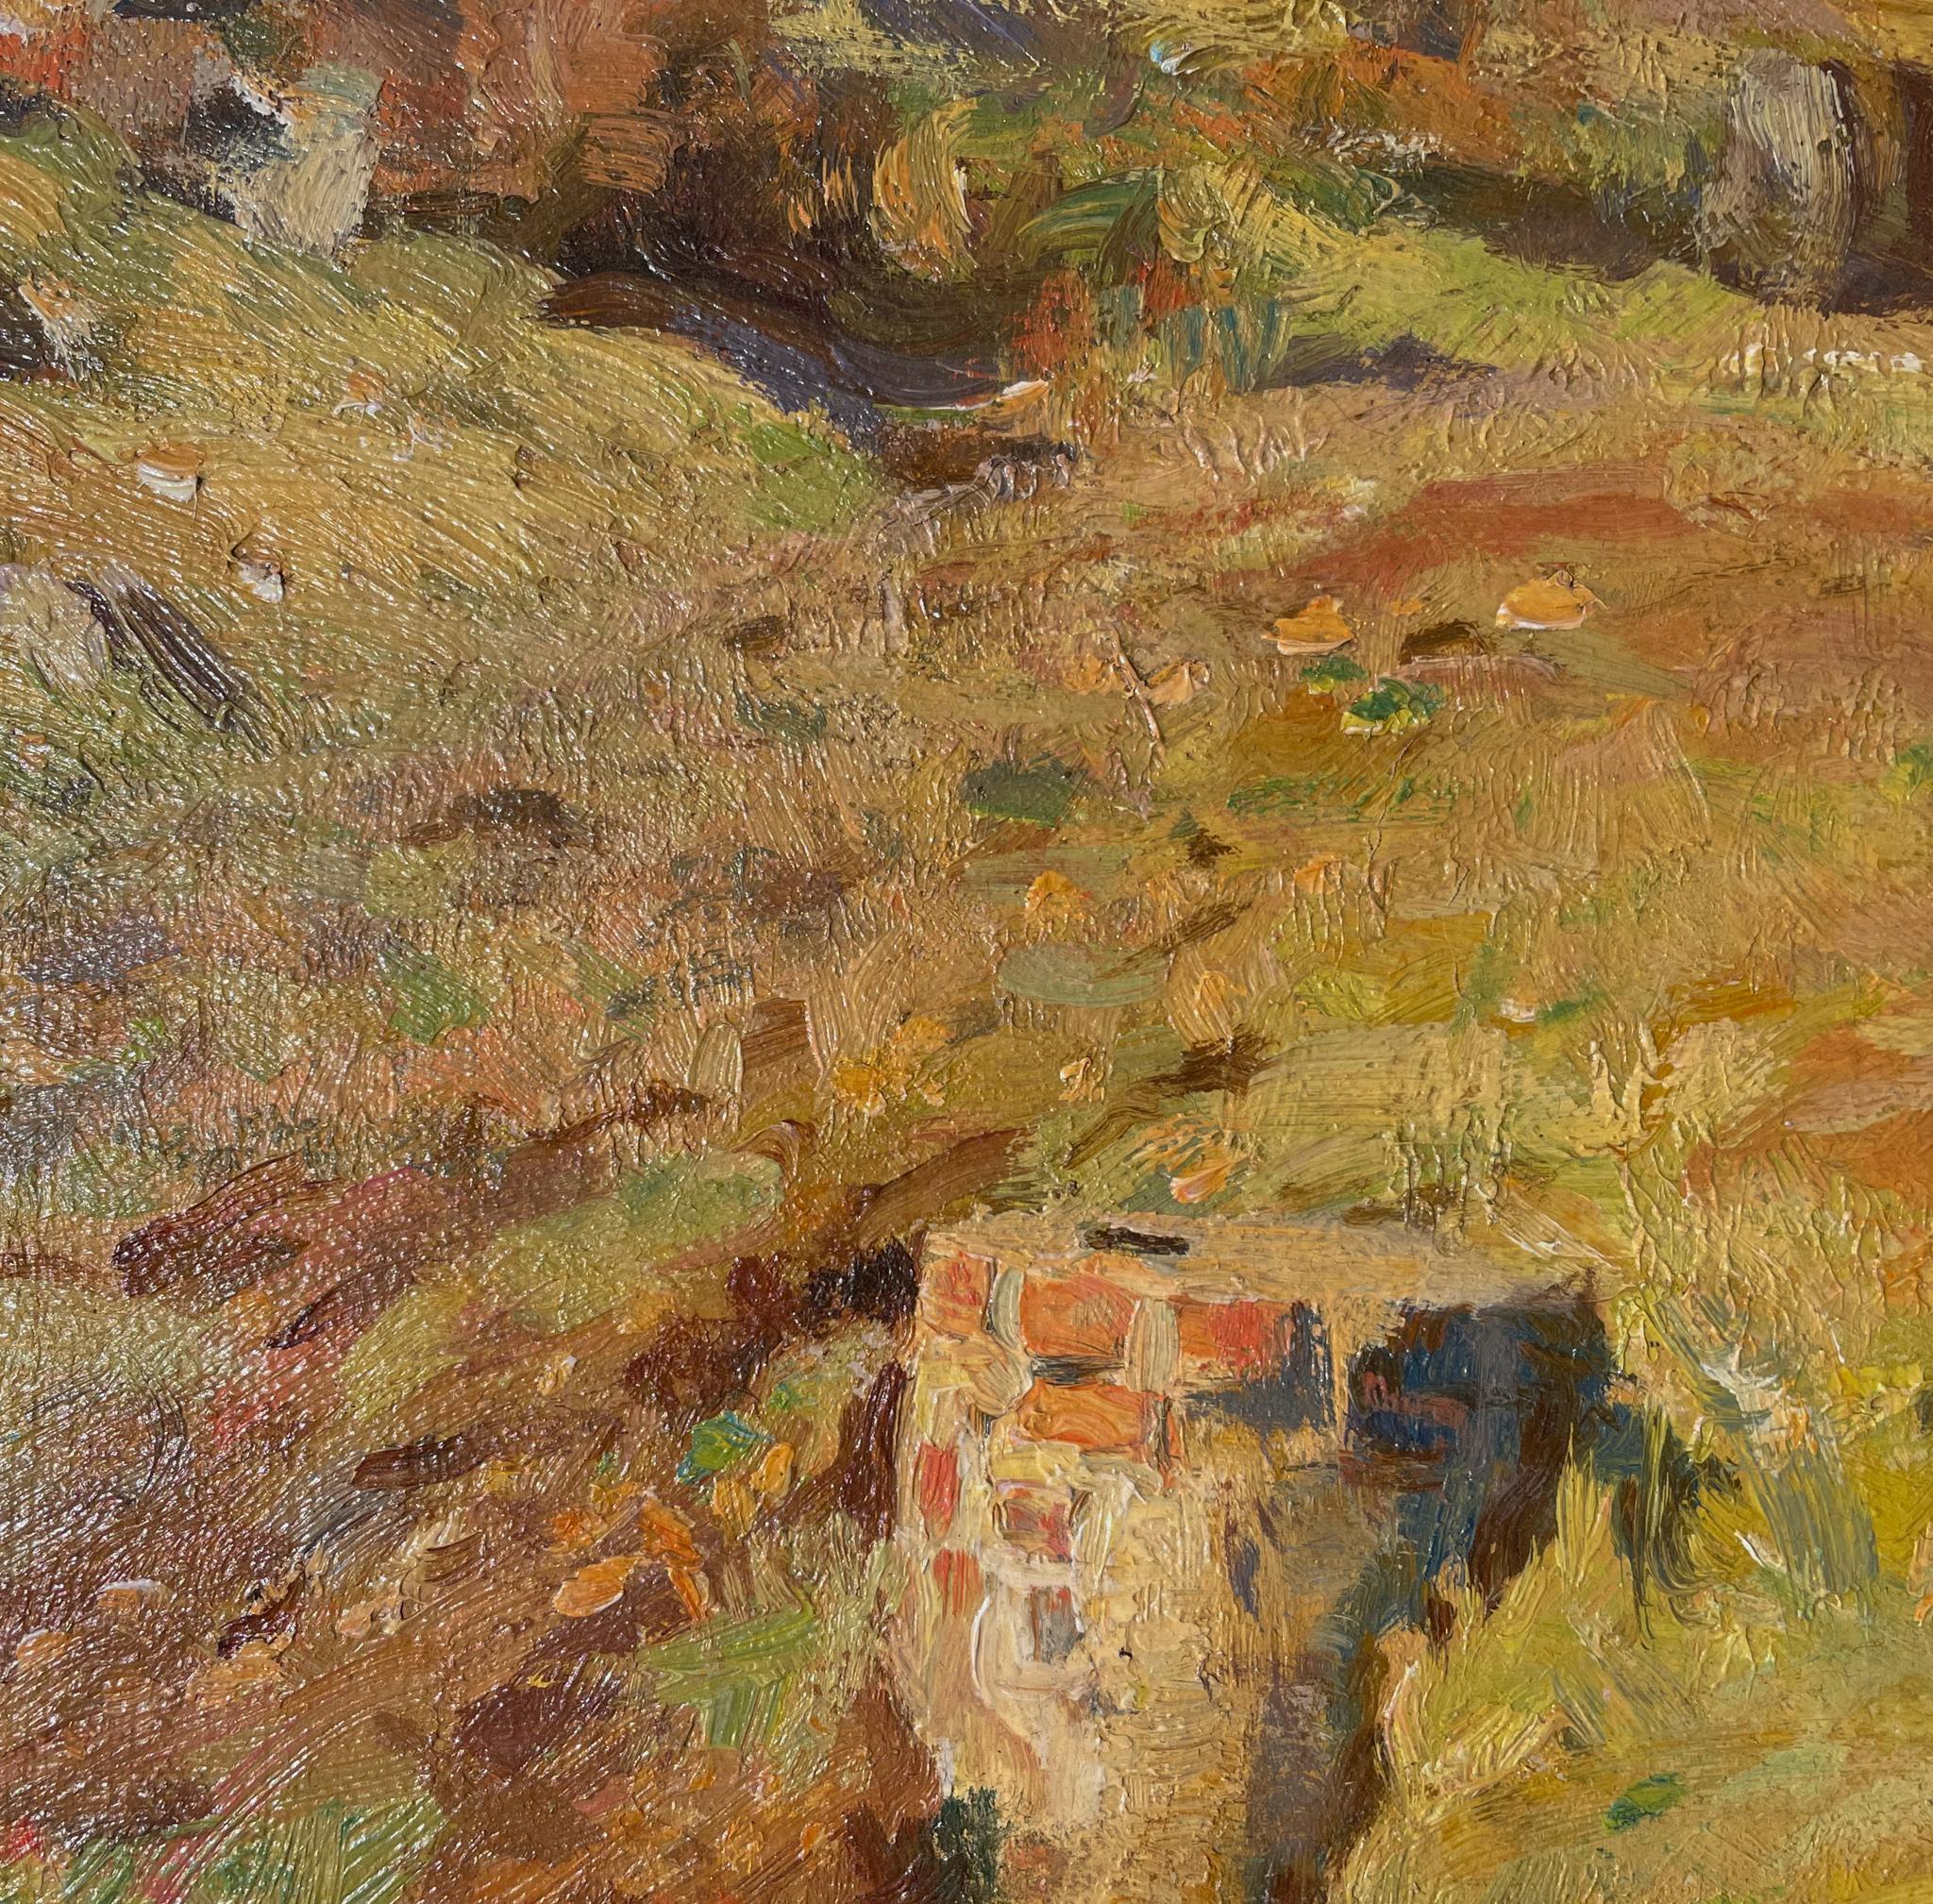 Landscape by George Luks (1867-1933)
Oil on canvas
11 x 14 inches unframed (27.94 x 35.56 cm)
Signed lower left

Description:
George Luks was an American artist originally born in Pennsylvania who devoted himself to the artistic ideals of the Ashcan